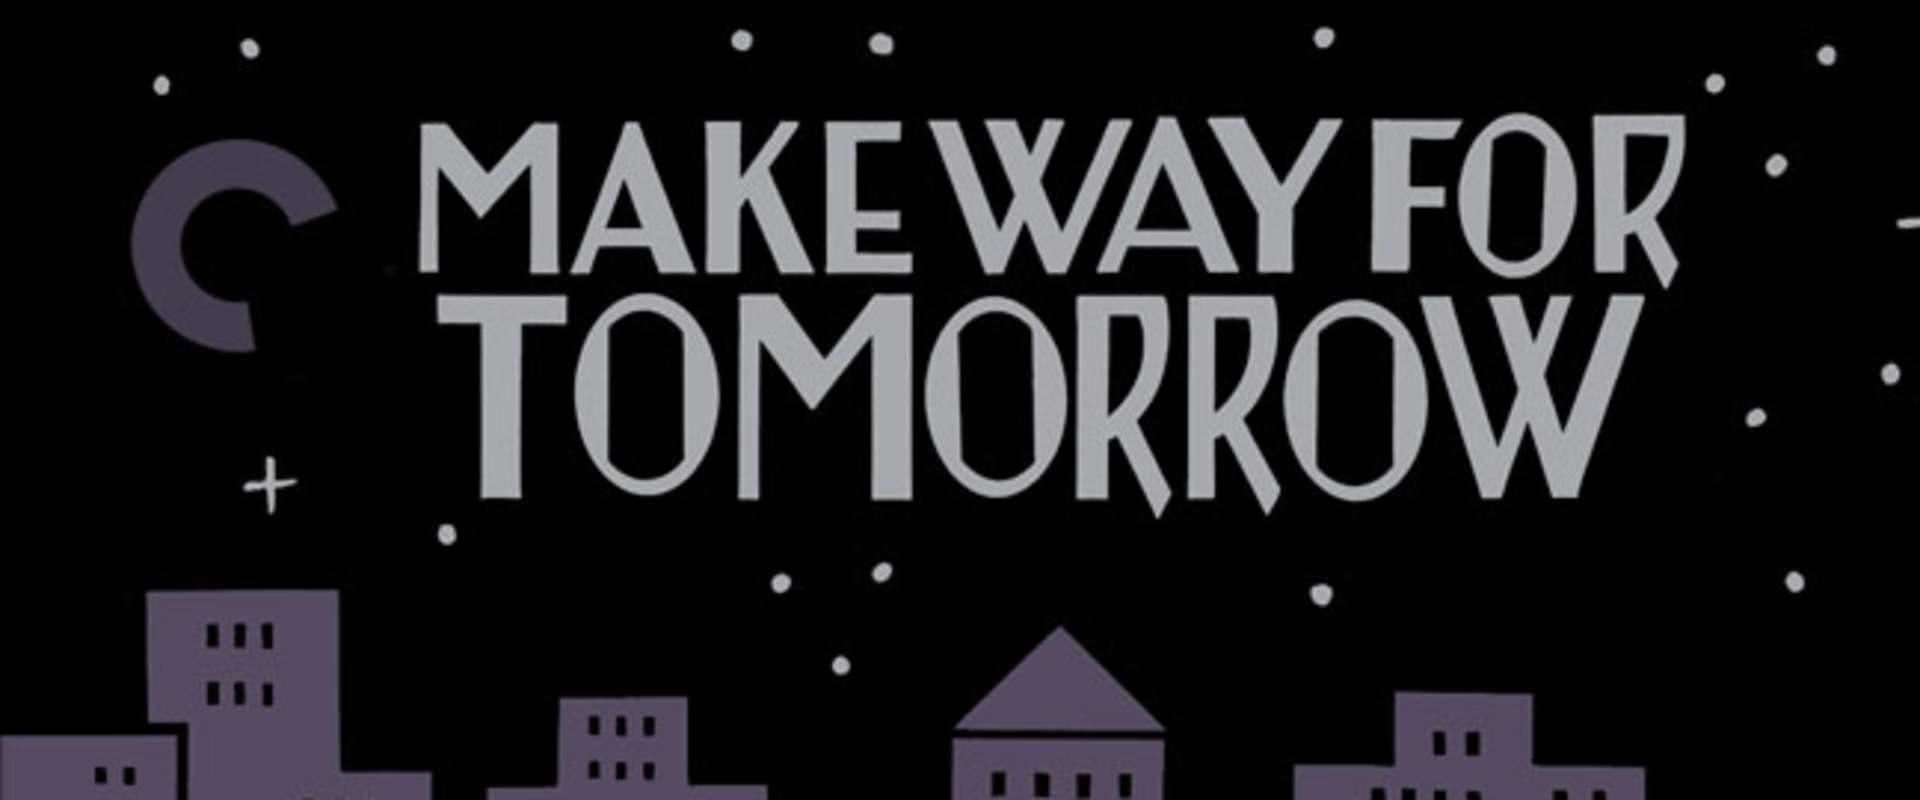 Make Way for Tomorrow background 1